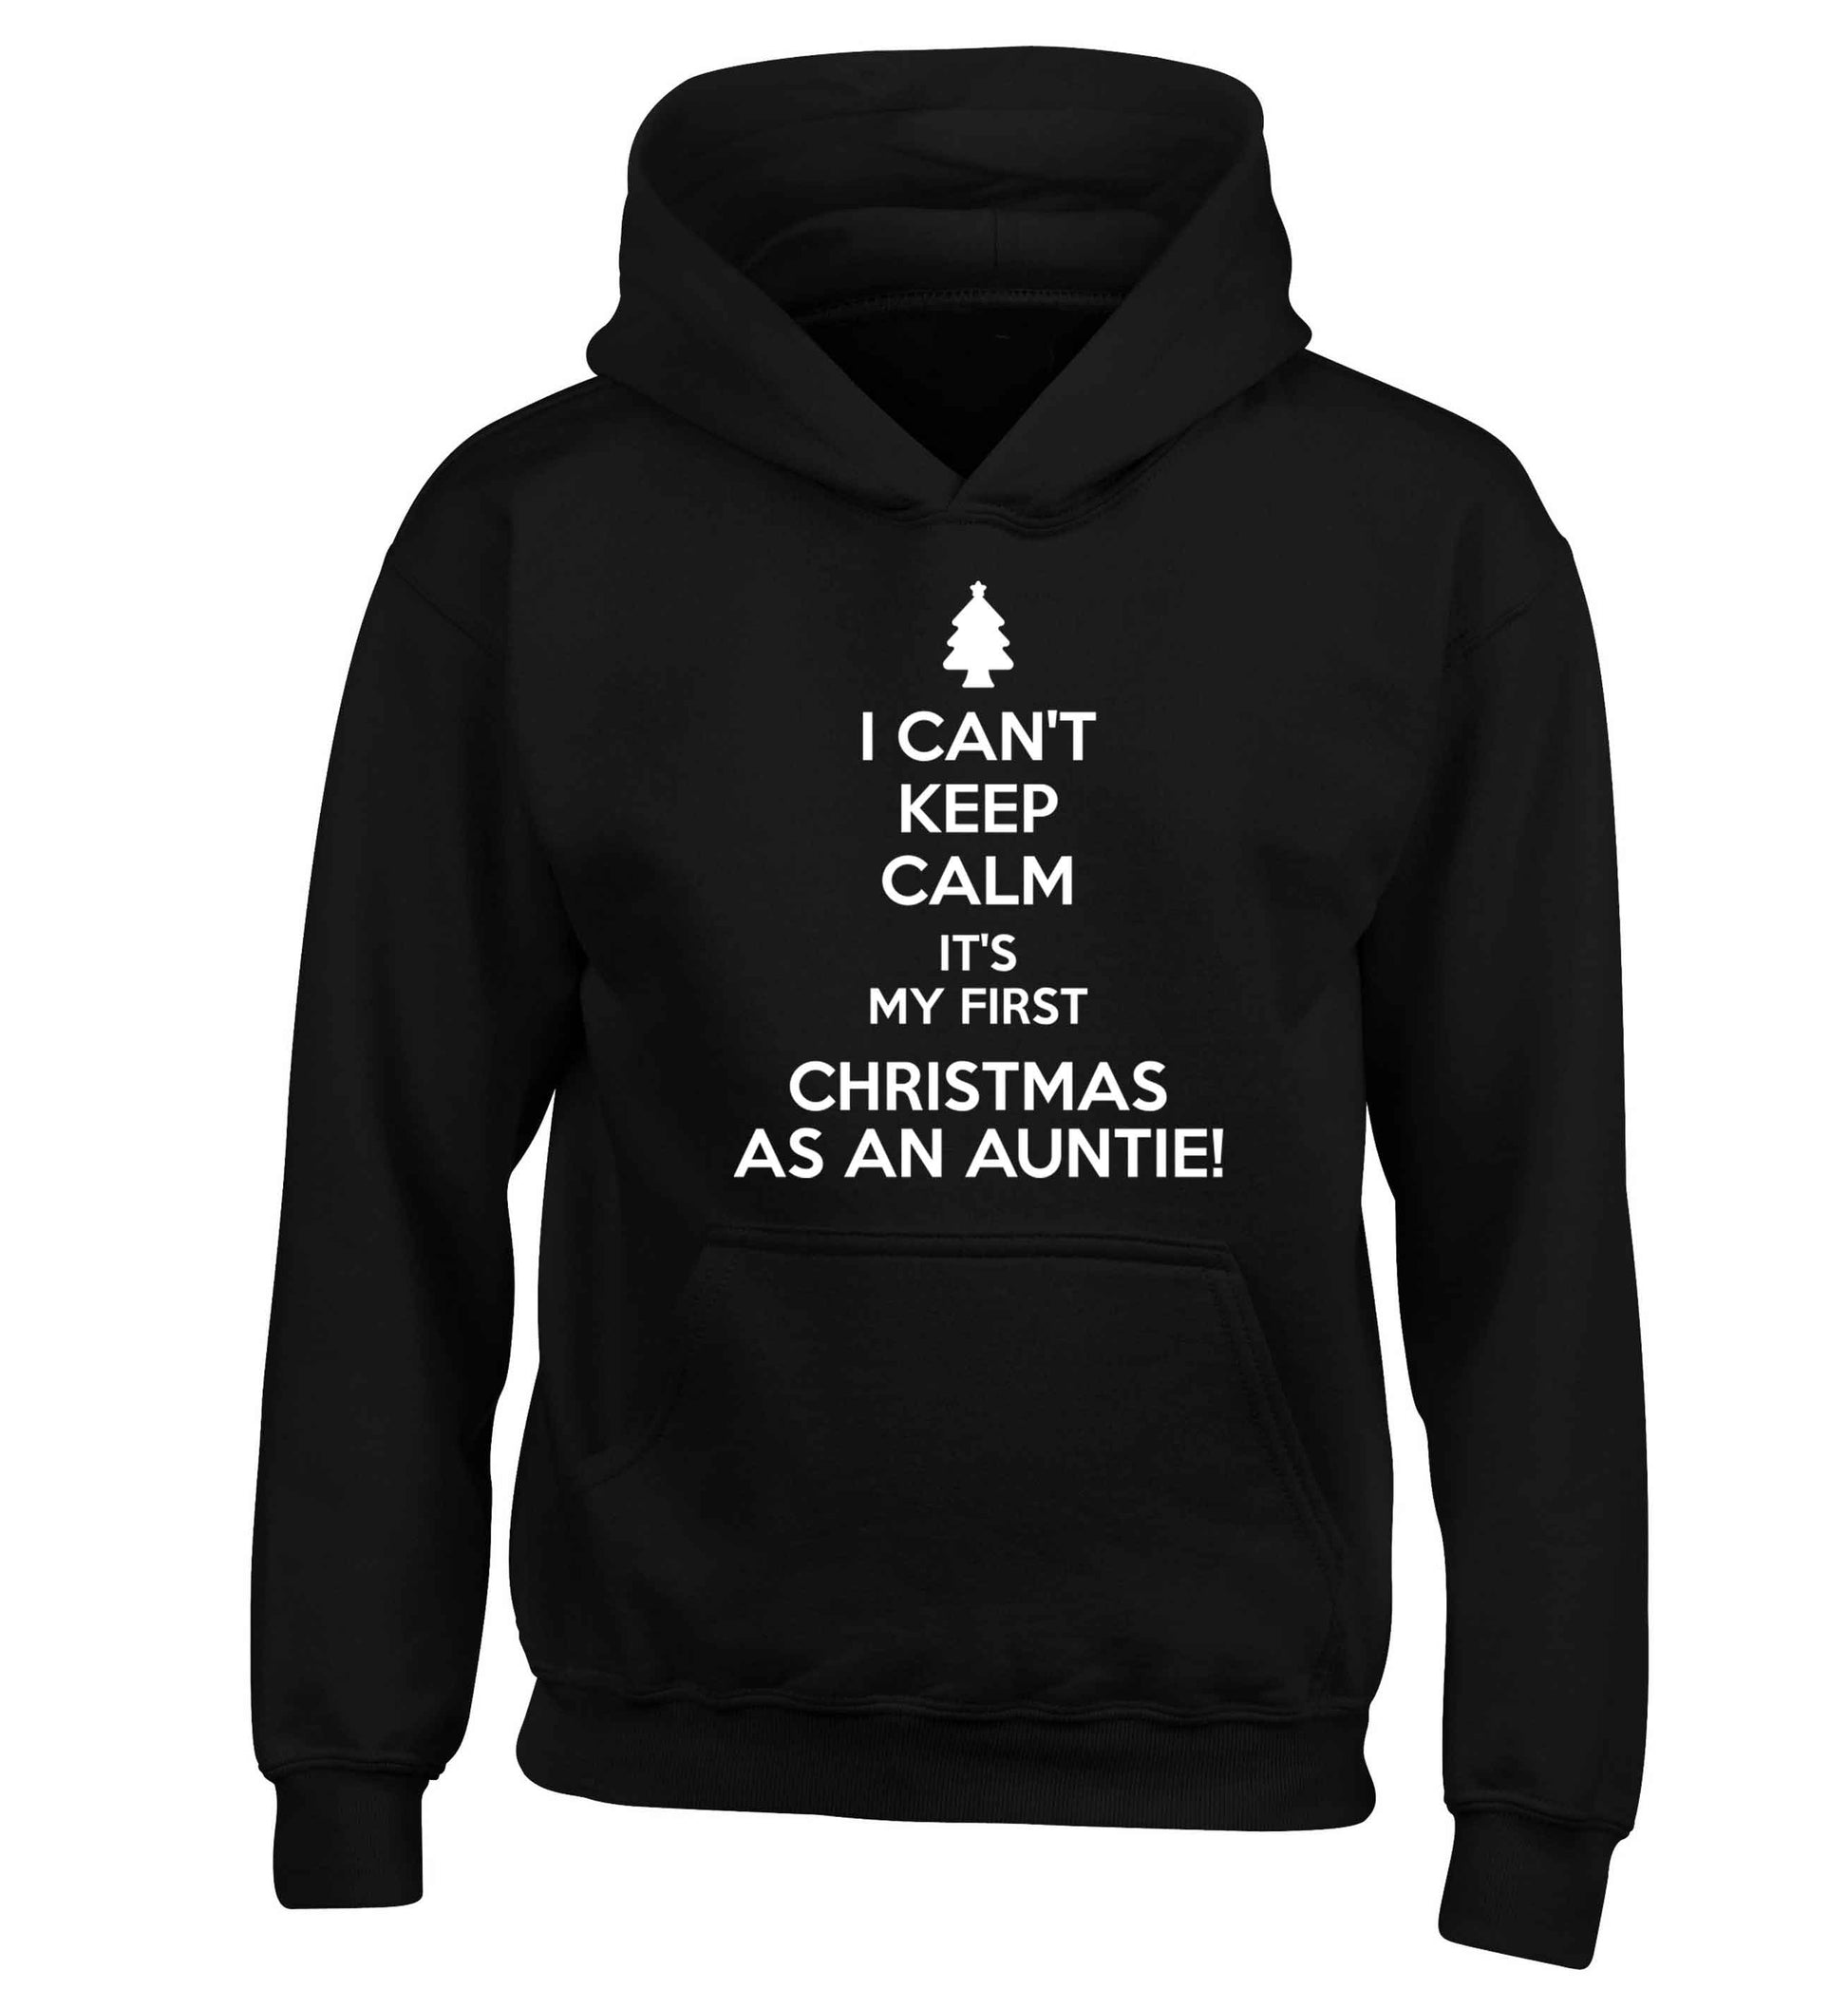 I can't keep calm it's my first Christmas as an auntie! children's black hoodie 12-13 Years